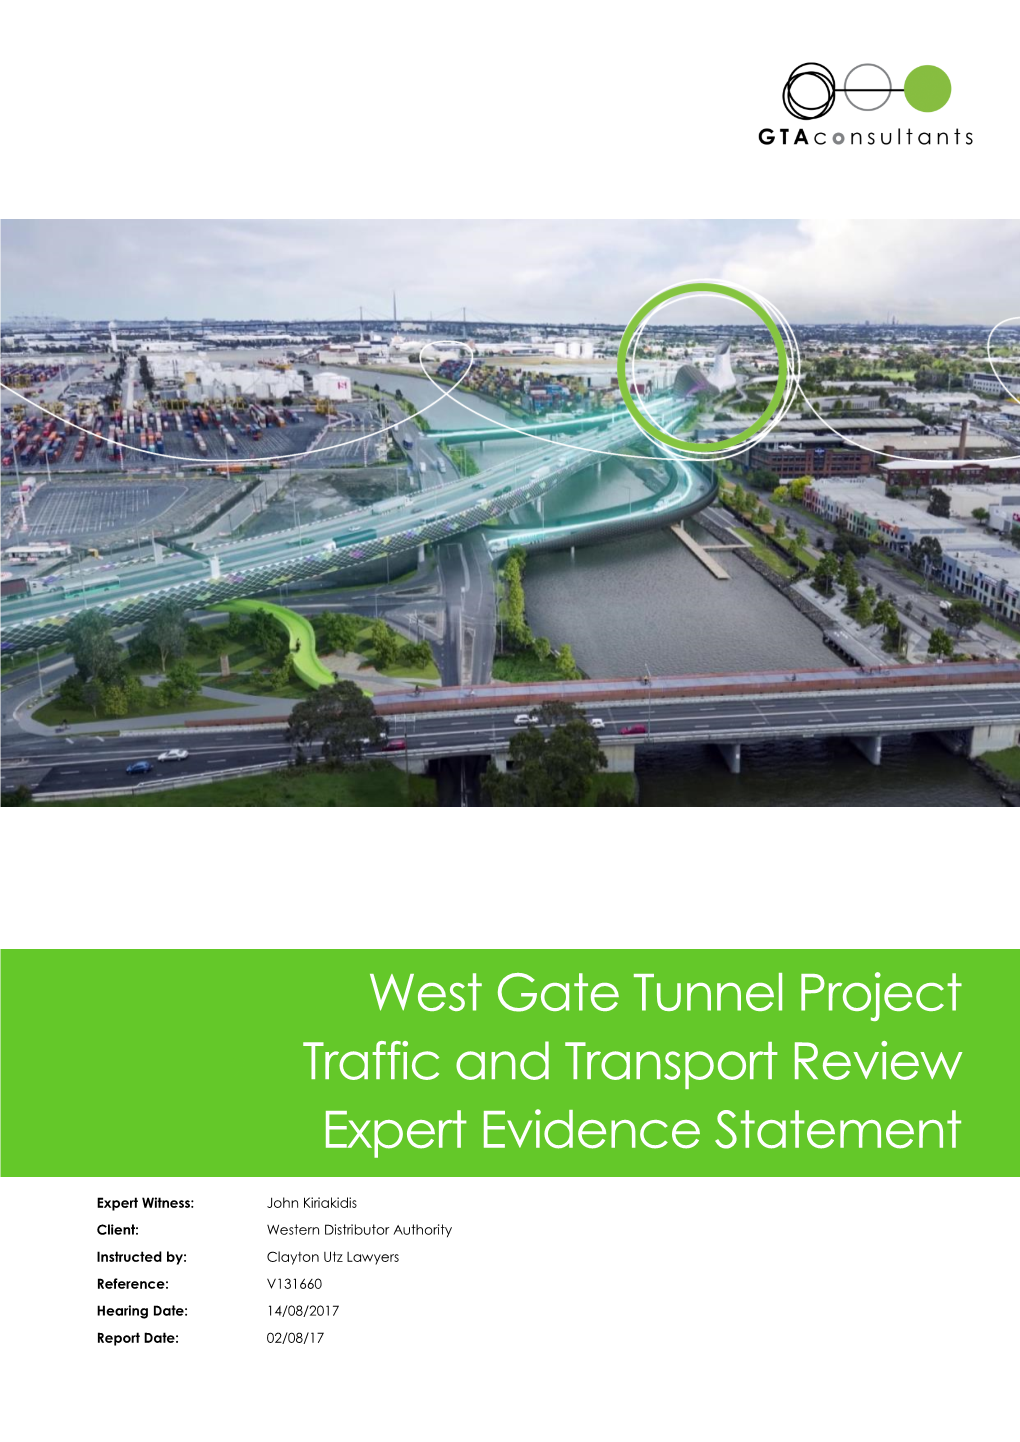 John Kiriakidis– Curriculum Vitae B: Matters Raised by PPV Guide to Expert Evidence C: West Gate Tunnel Active Transport